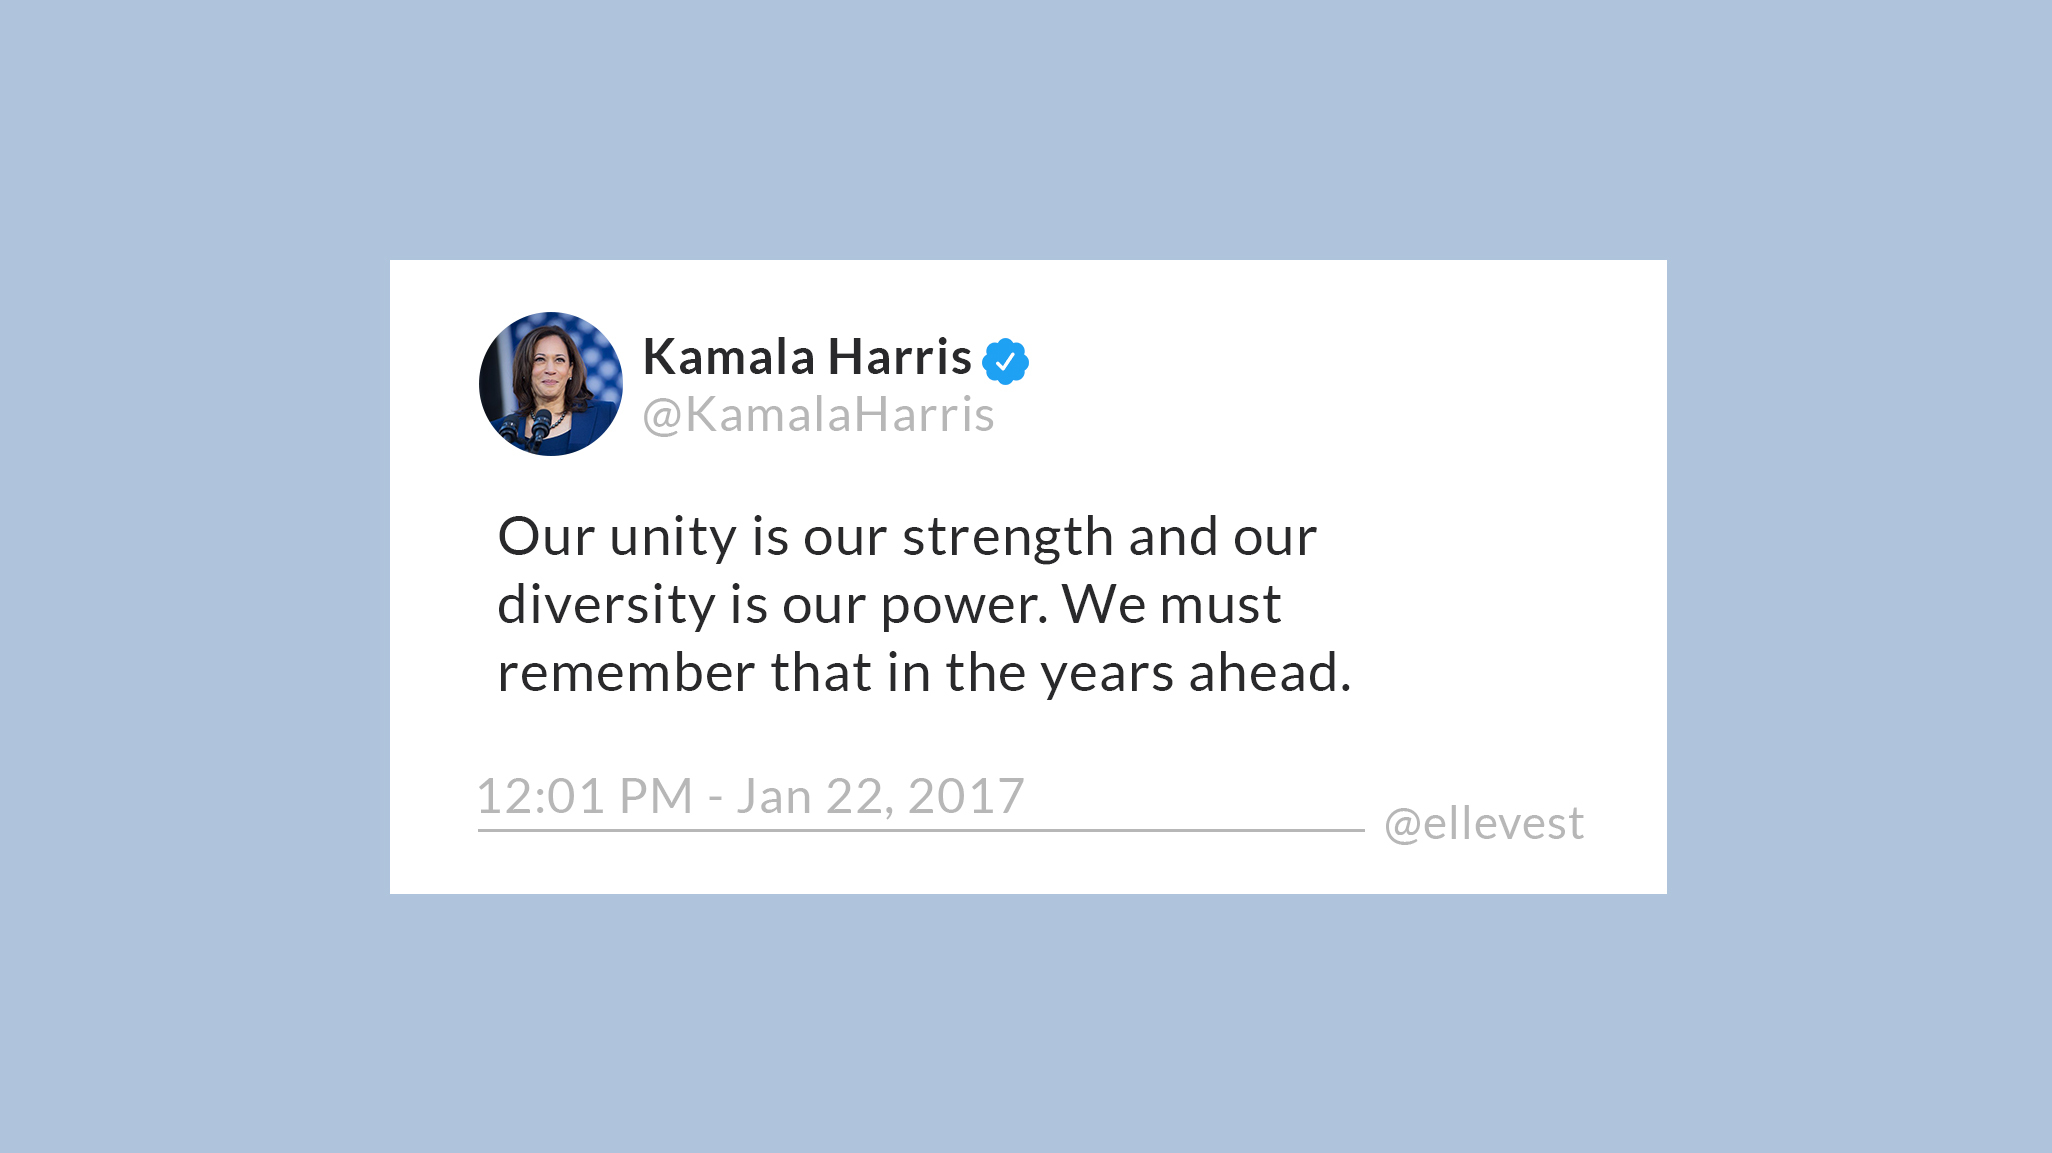 A tweet from 2017 by Kamala Harris saying Our unity is our strength and our diversity is our power.